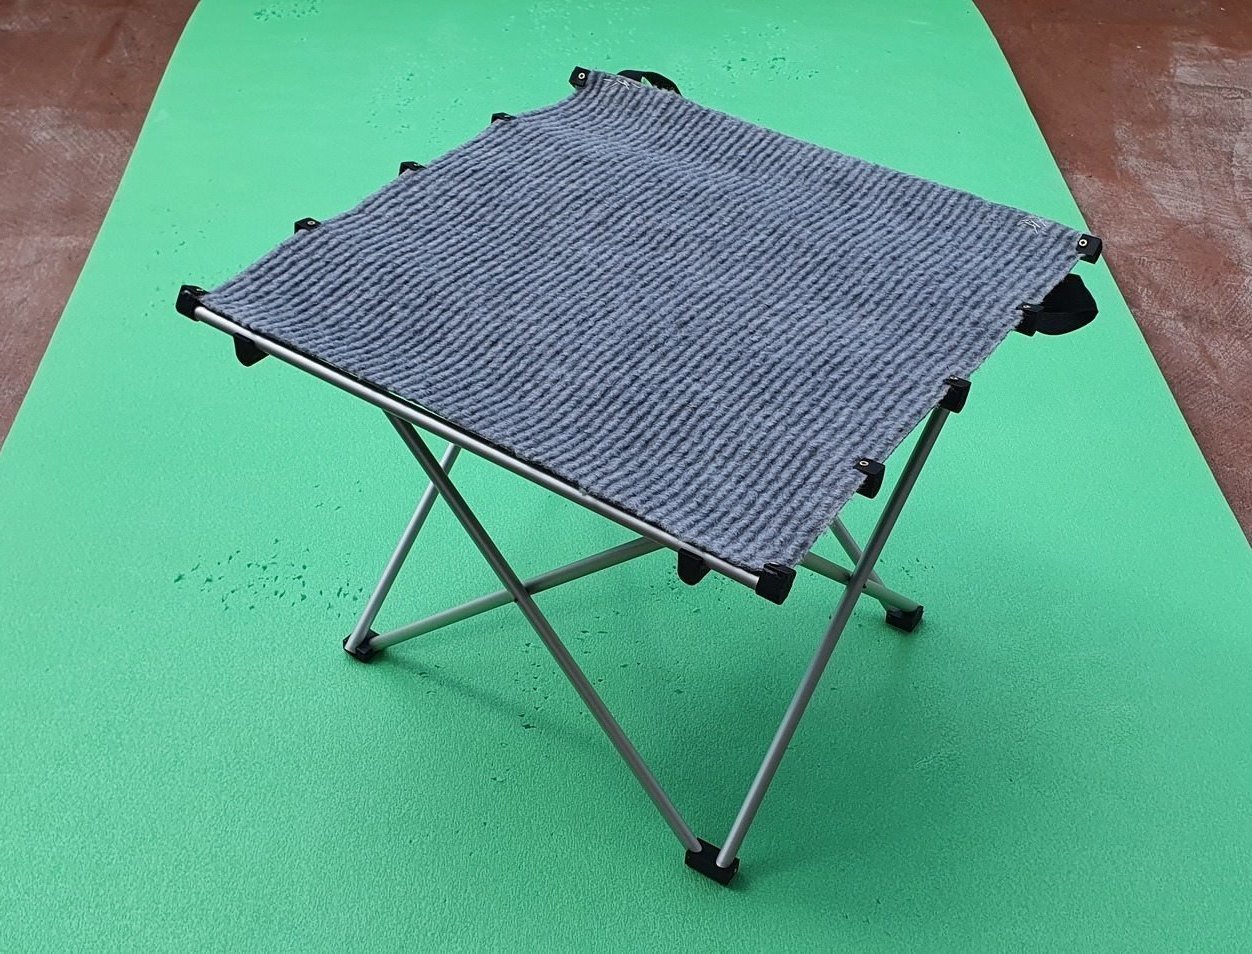 Compact folding table